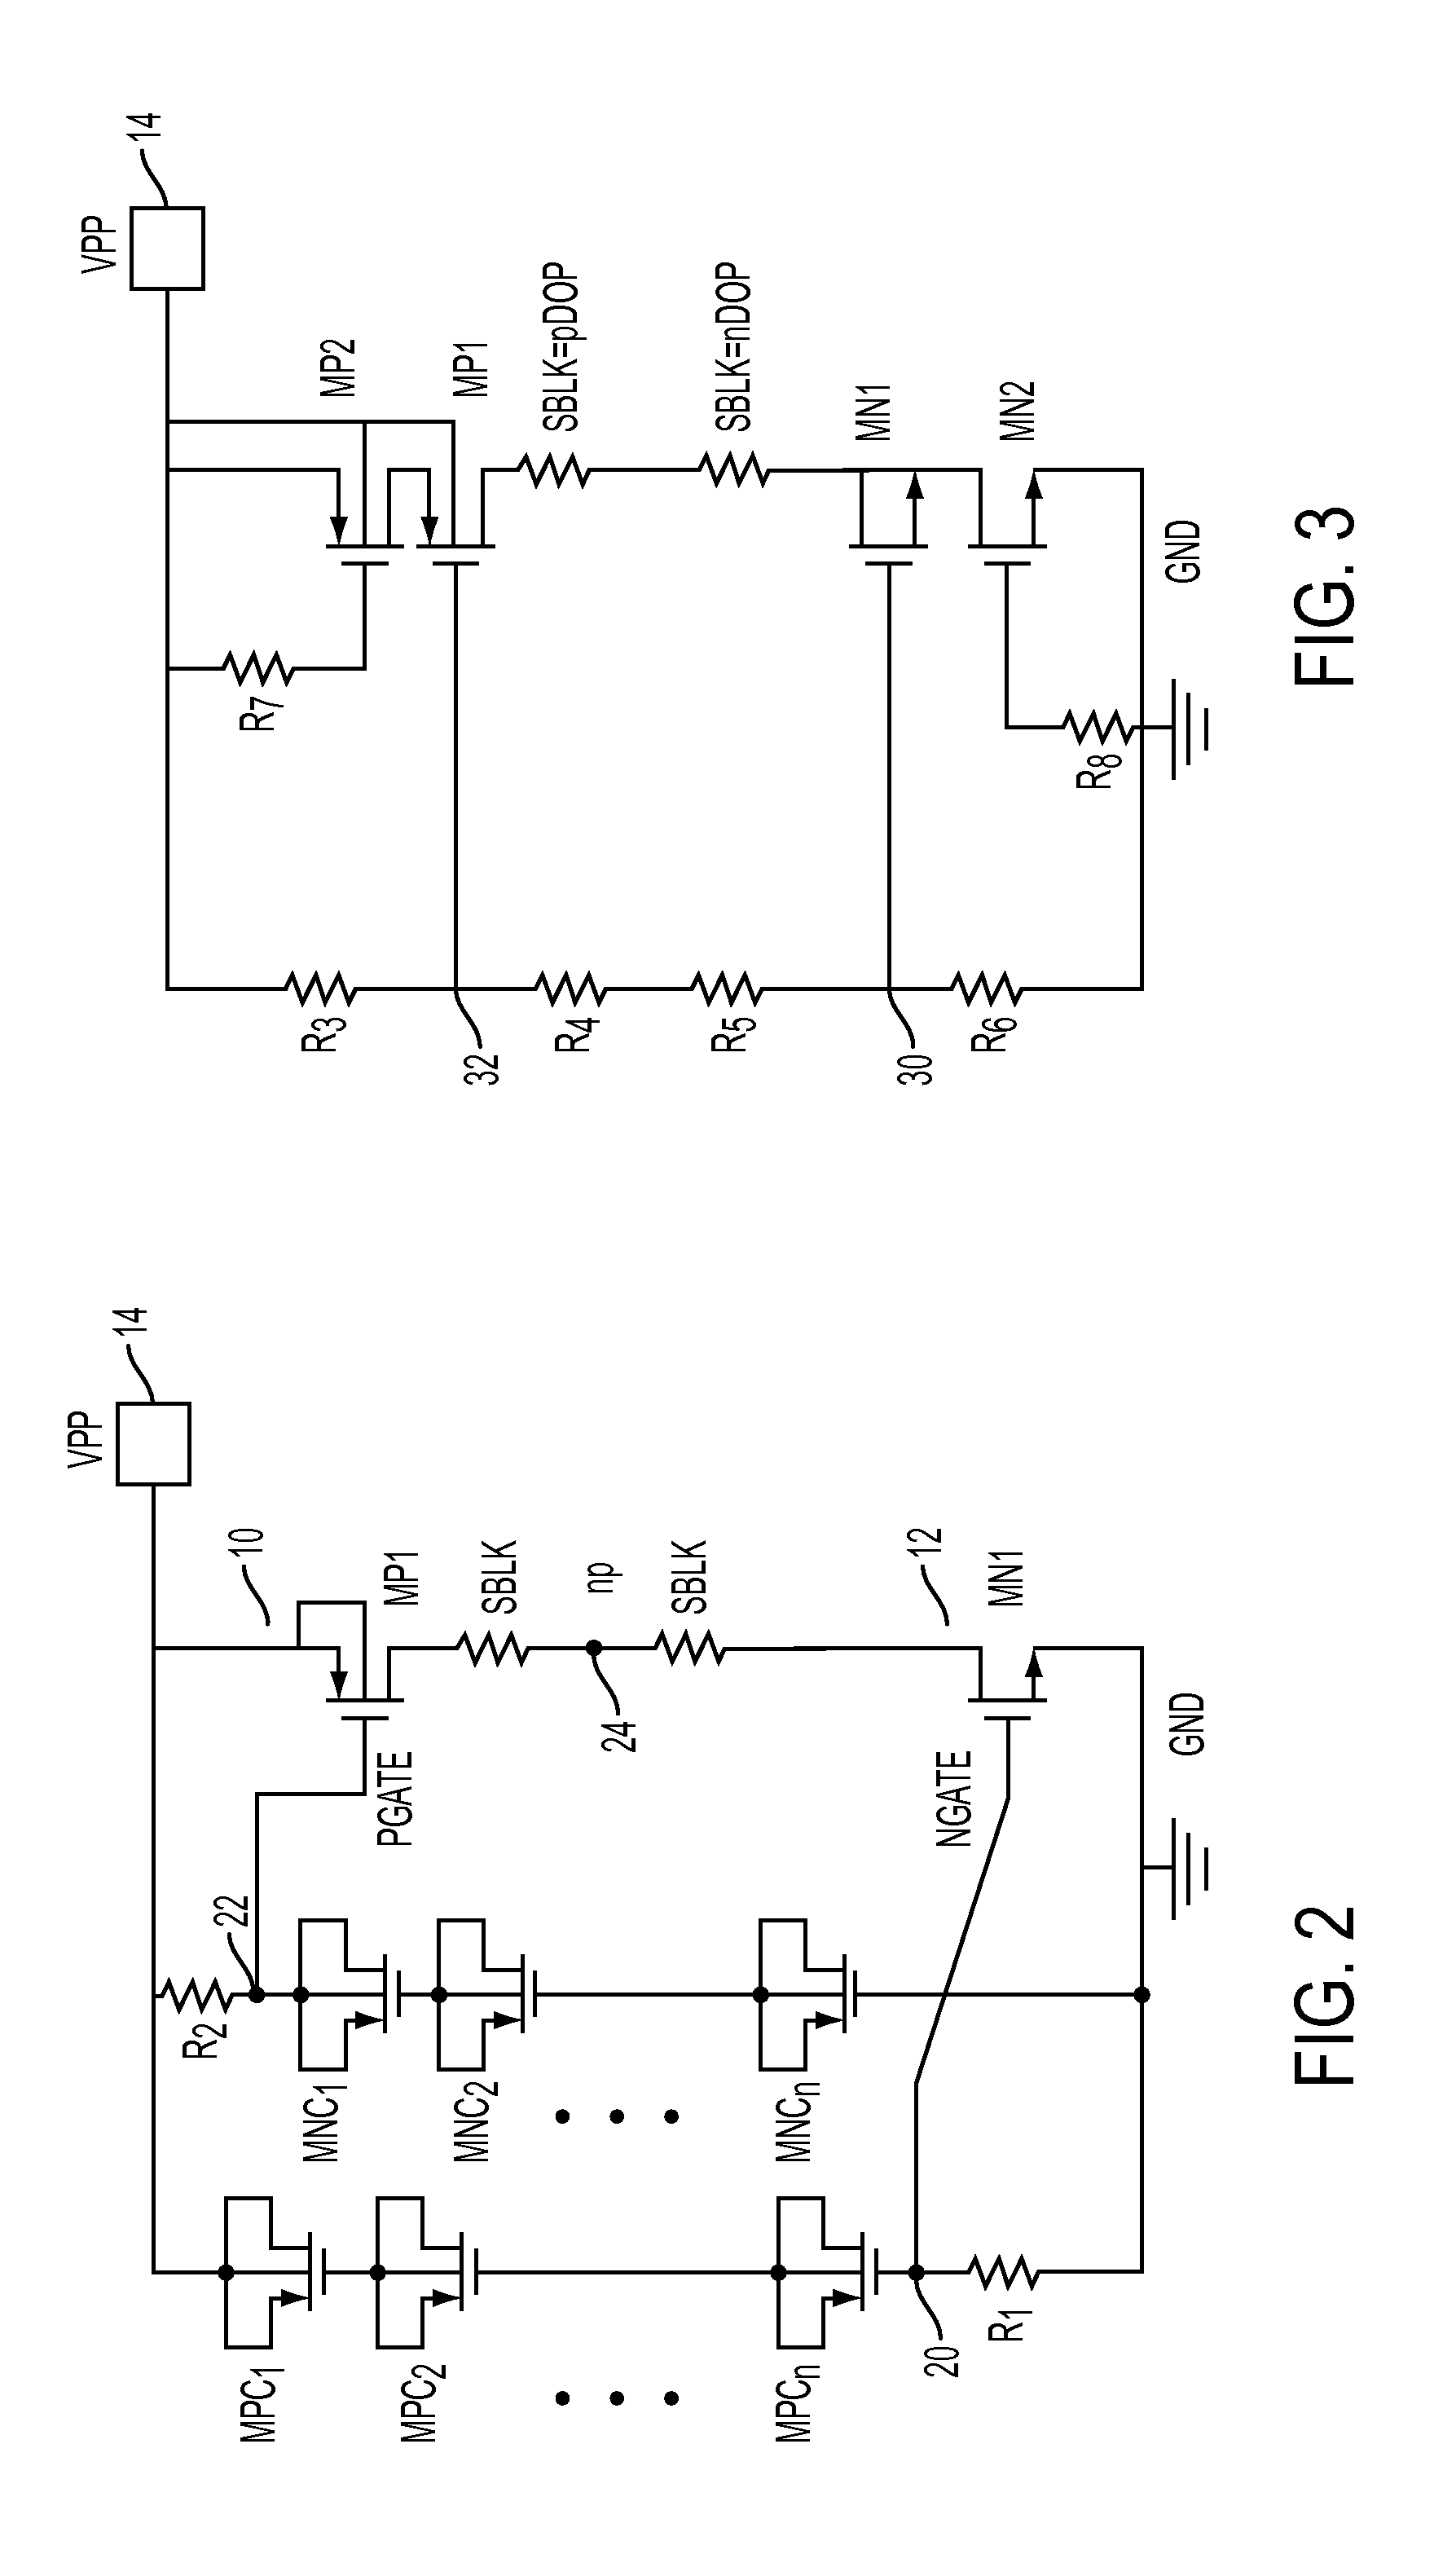 Power clamp for high voltage integrated circuits